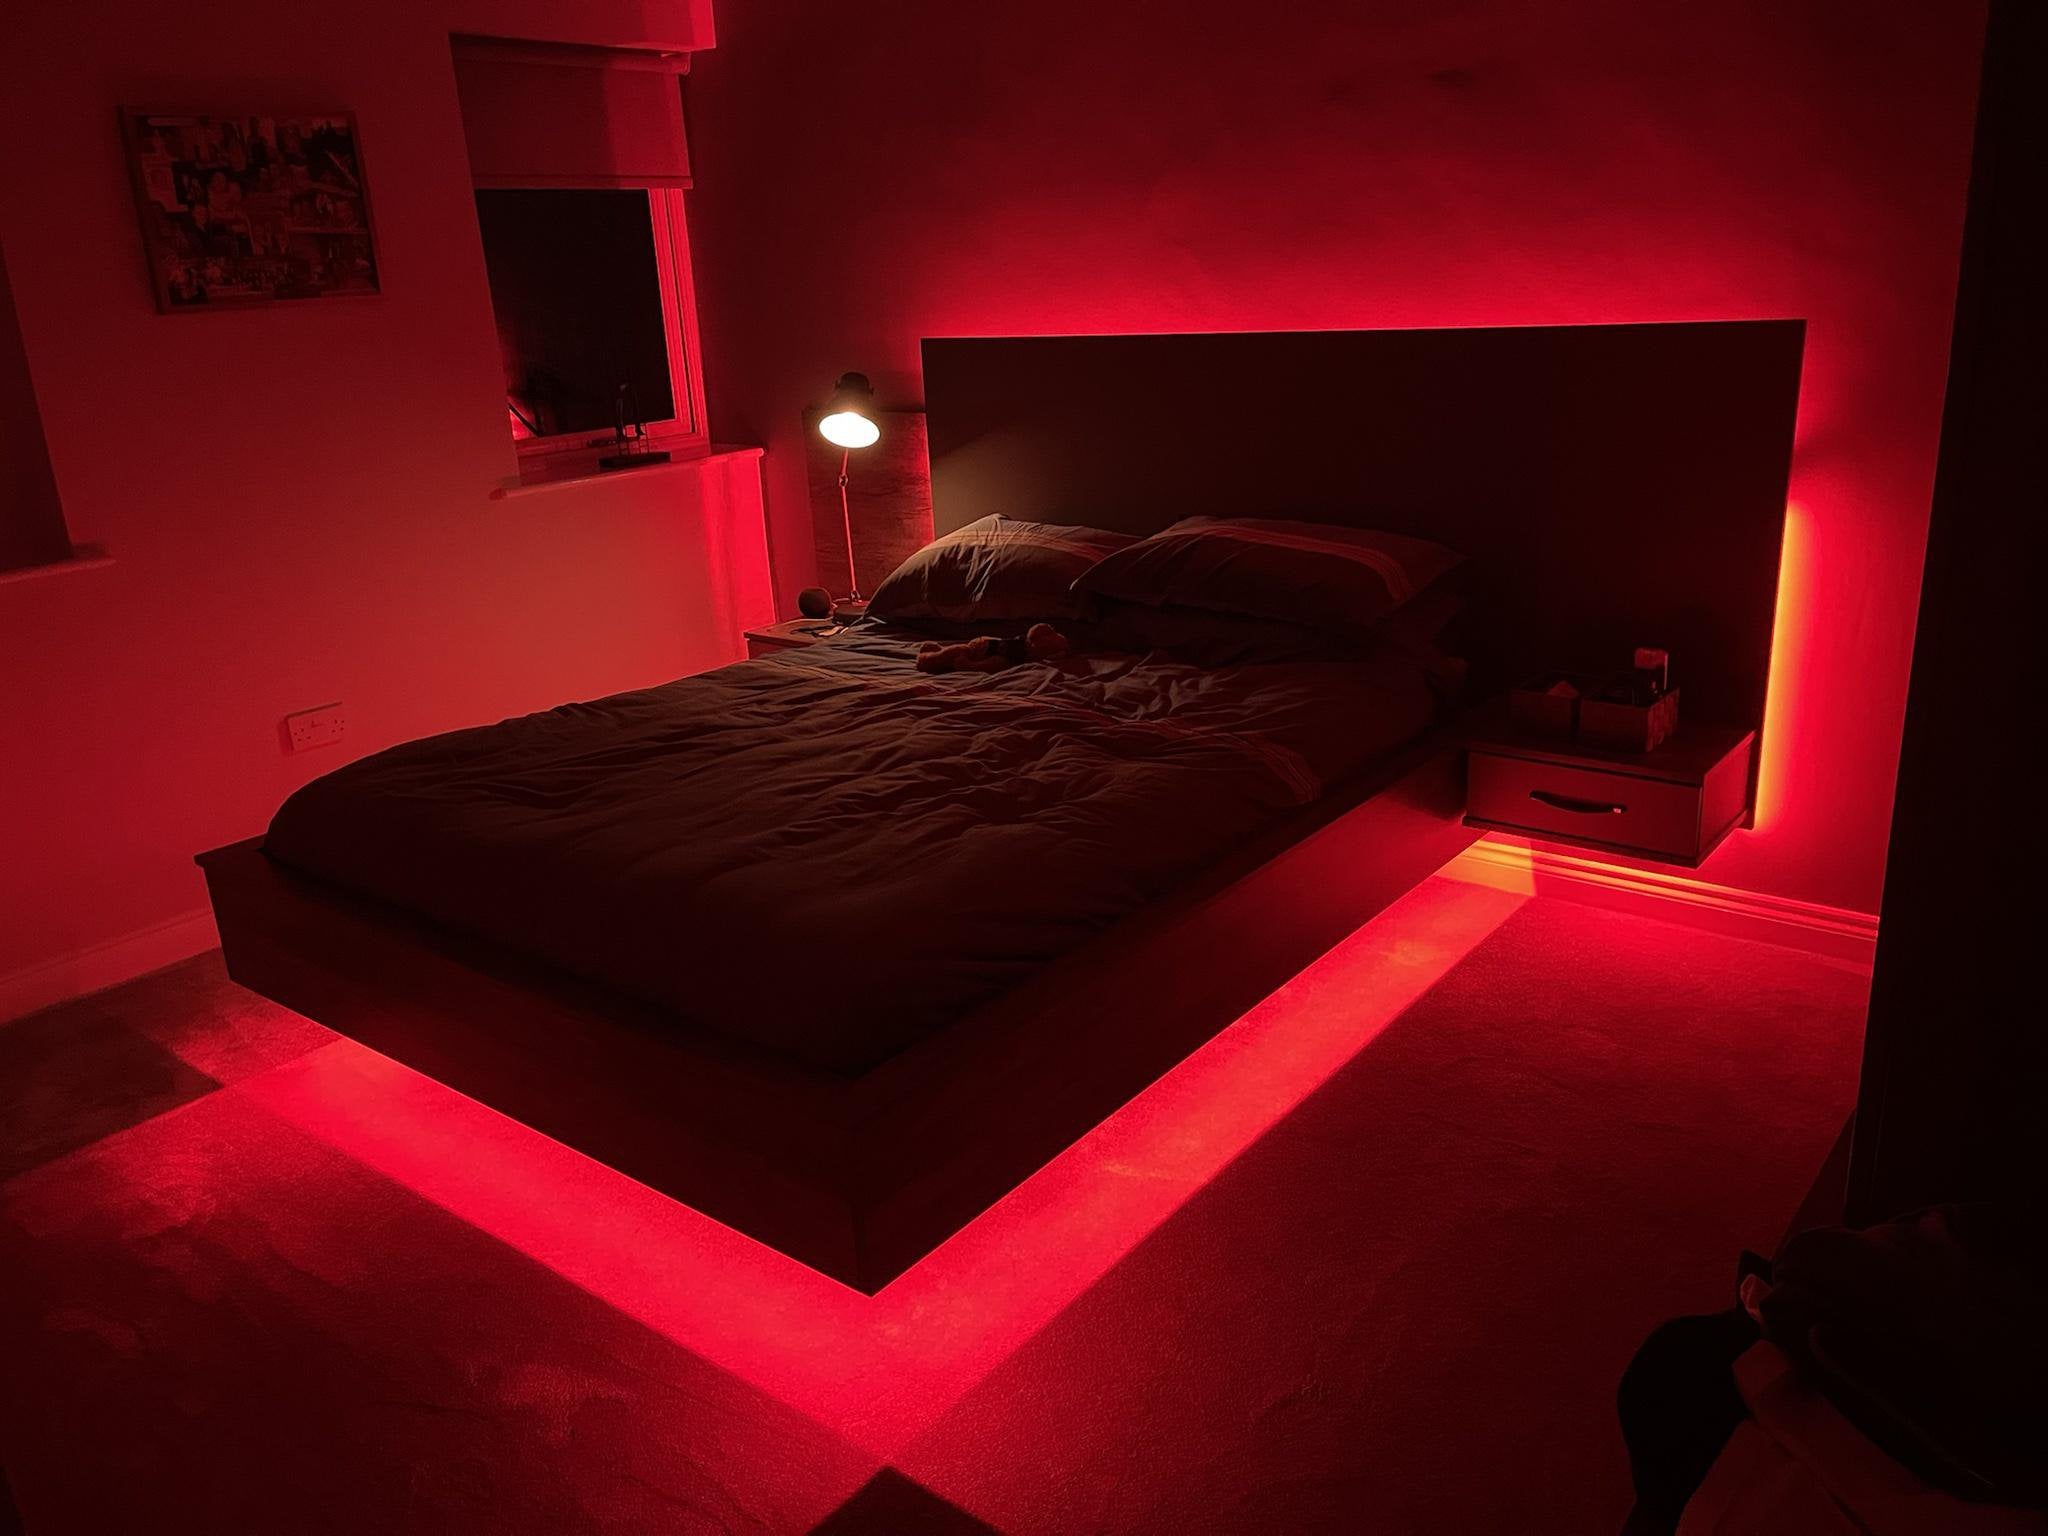 Finally I finished the lighting around my bed